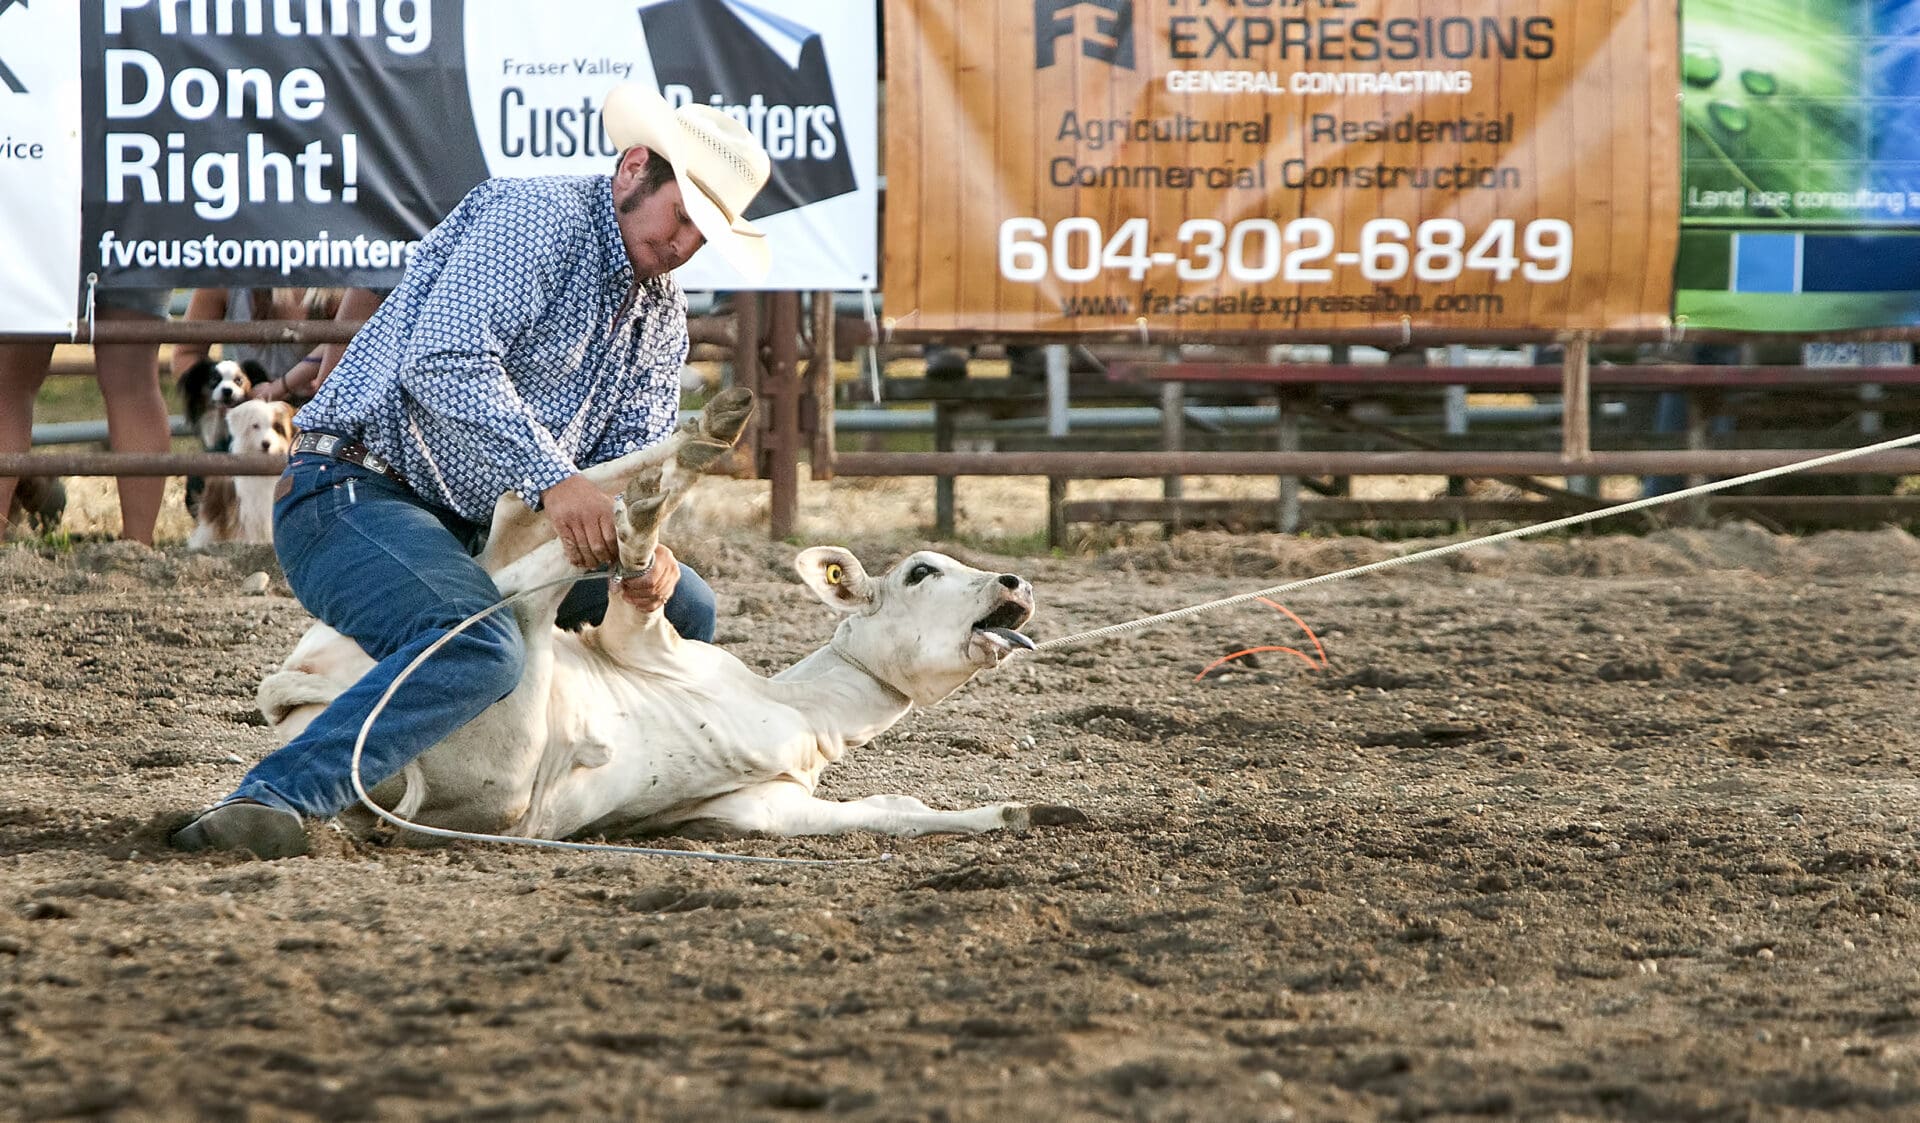 A calf shows signs of stress on the ground while a rodeo contestant ropes his legs.